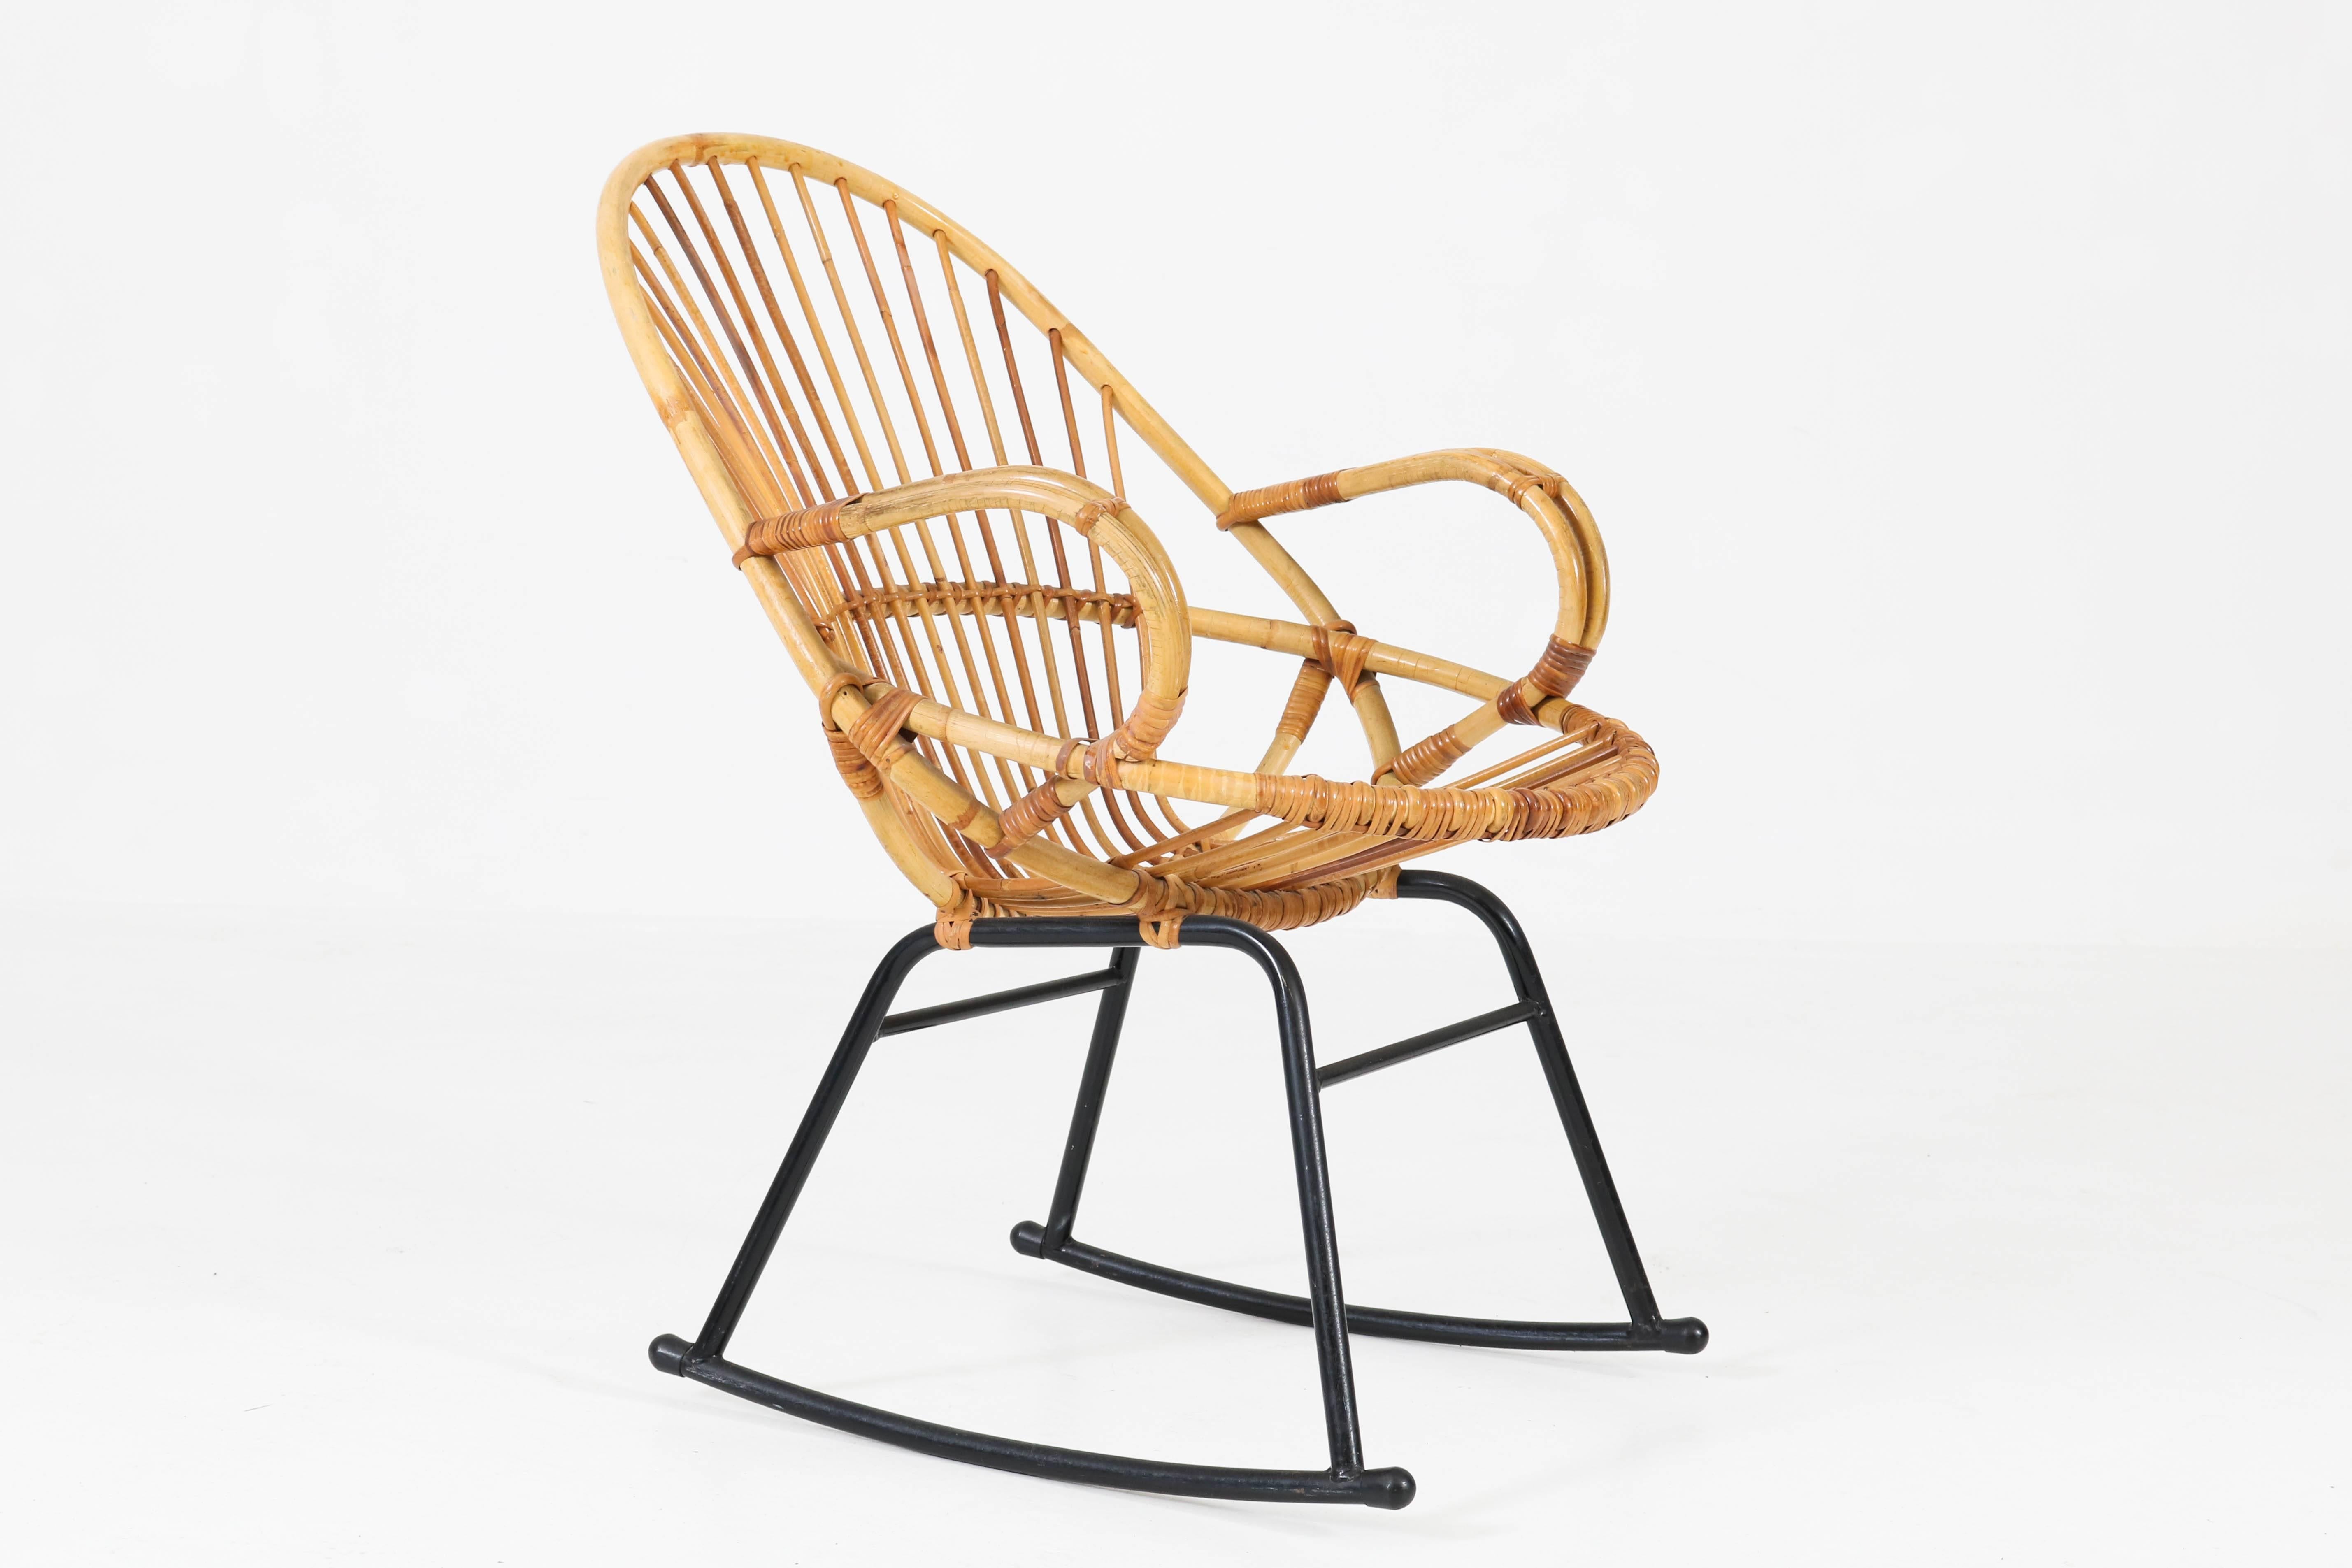 Lacquered Mid-Century Modern Rattan Rocking Chair by Gebroeders Jonker for Rohe, 1960s